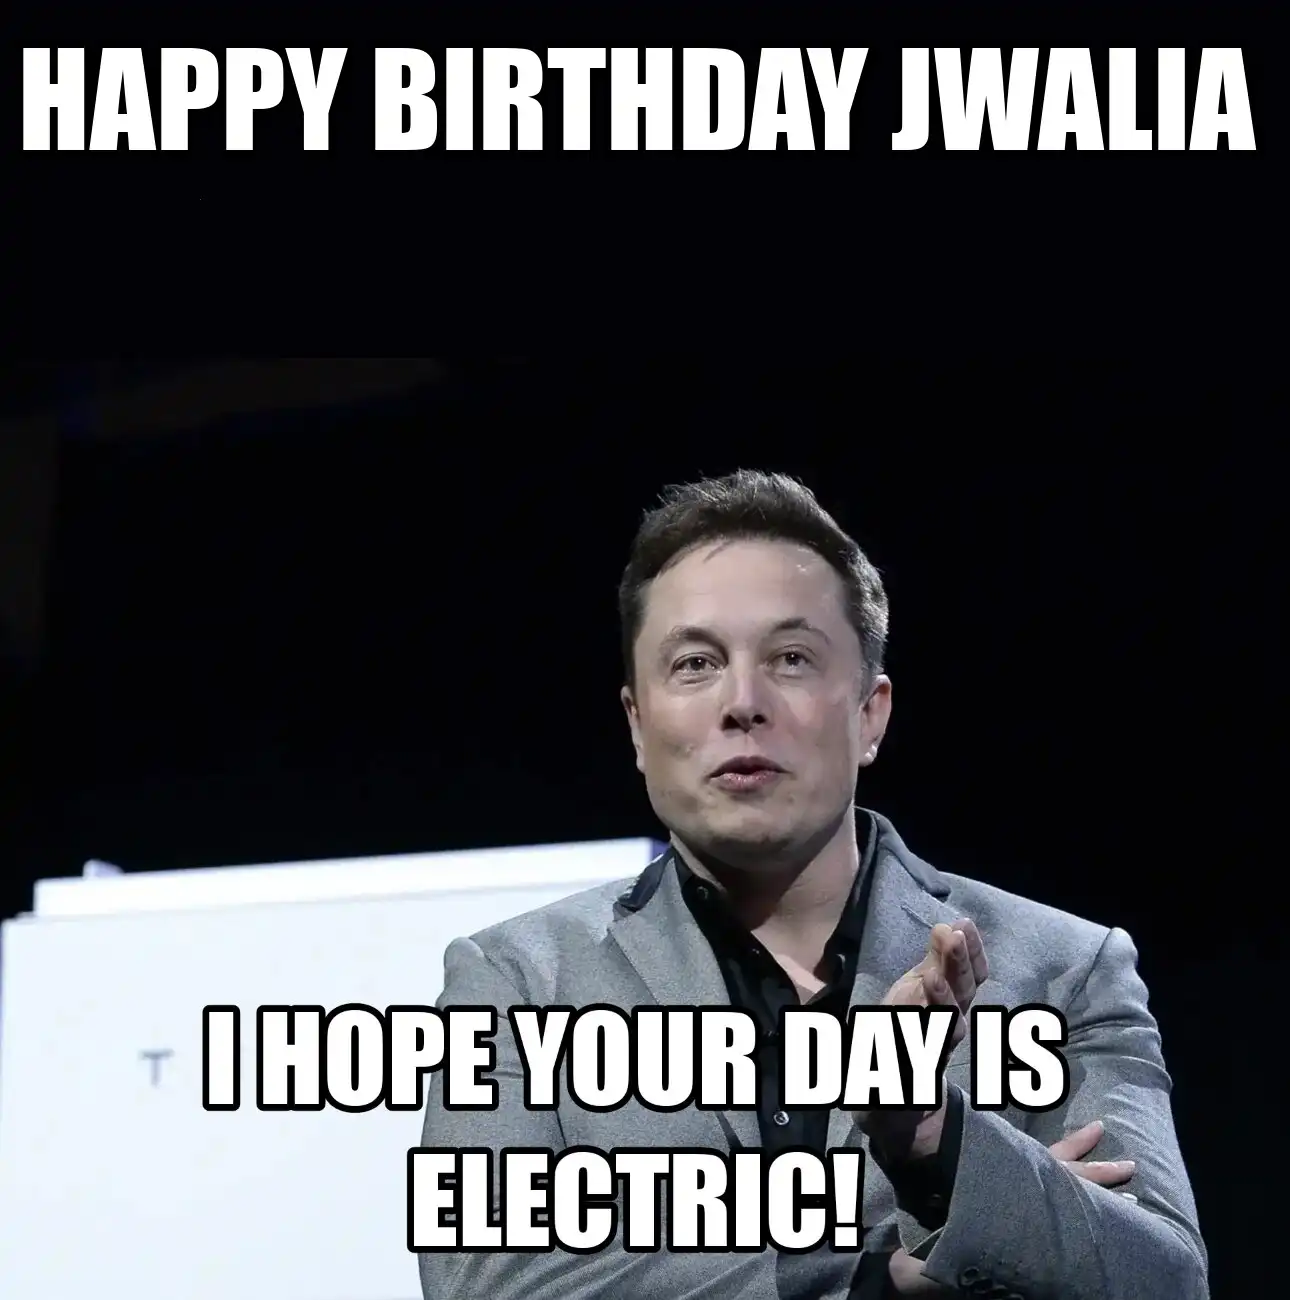 Happy Birthday Jwalia I Hope Your Day Is Electric Meme